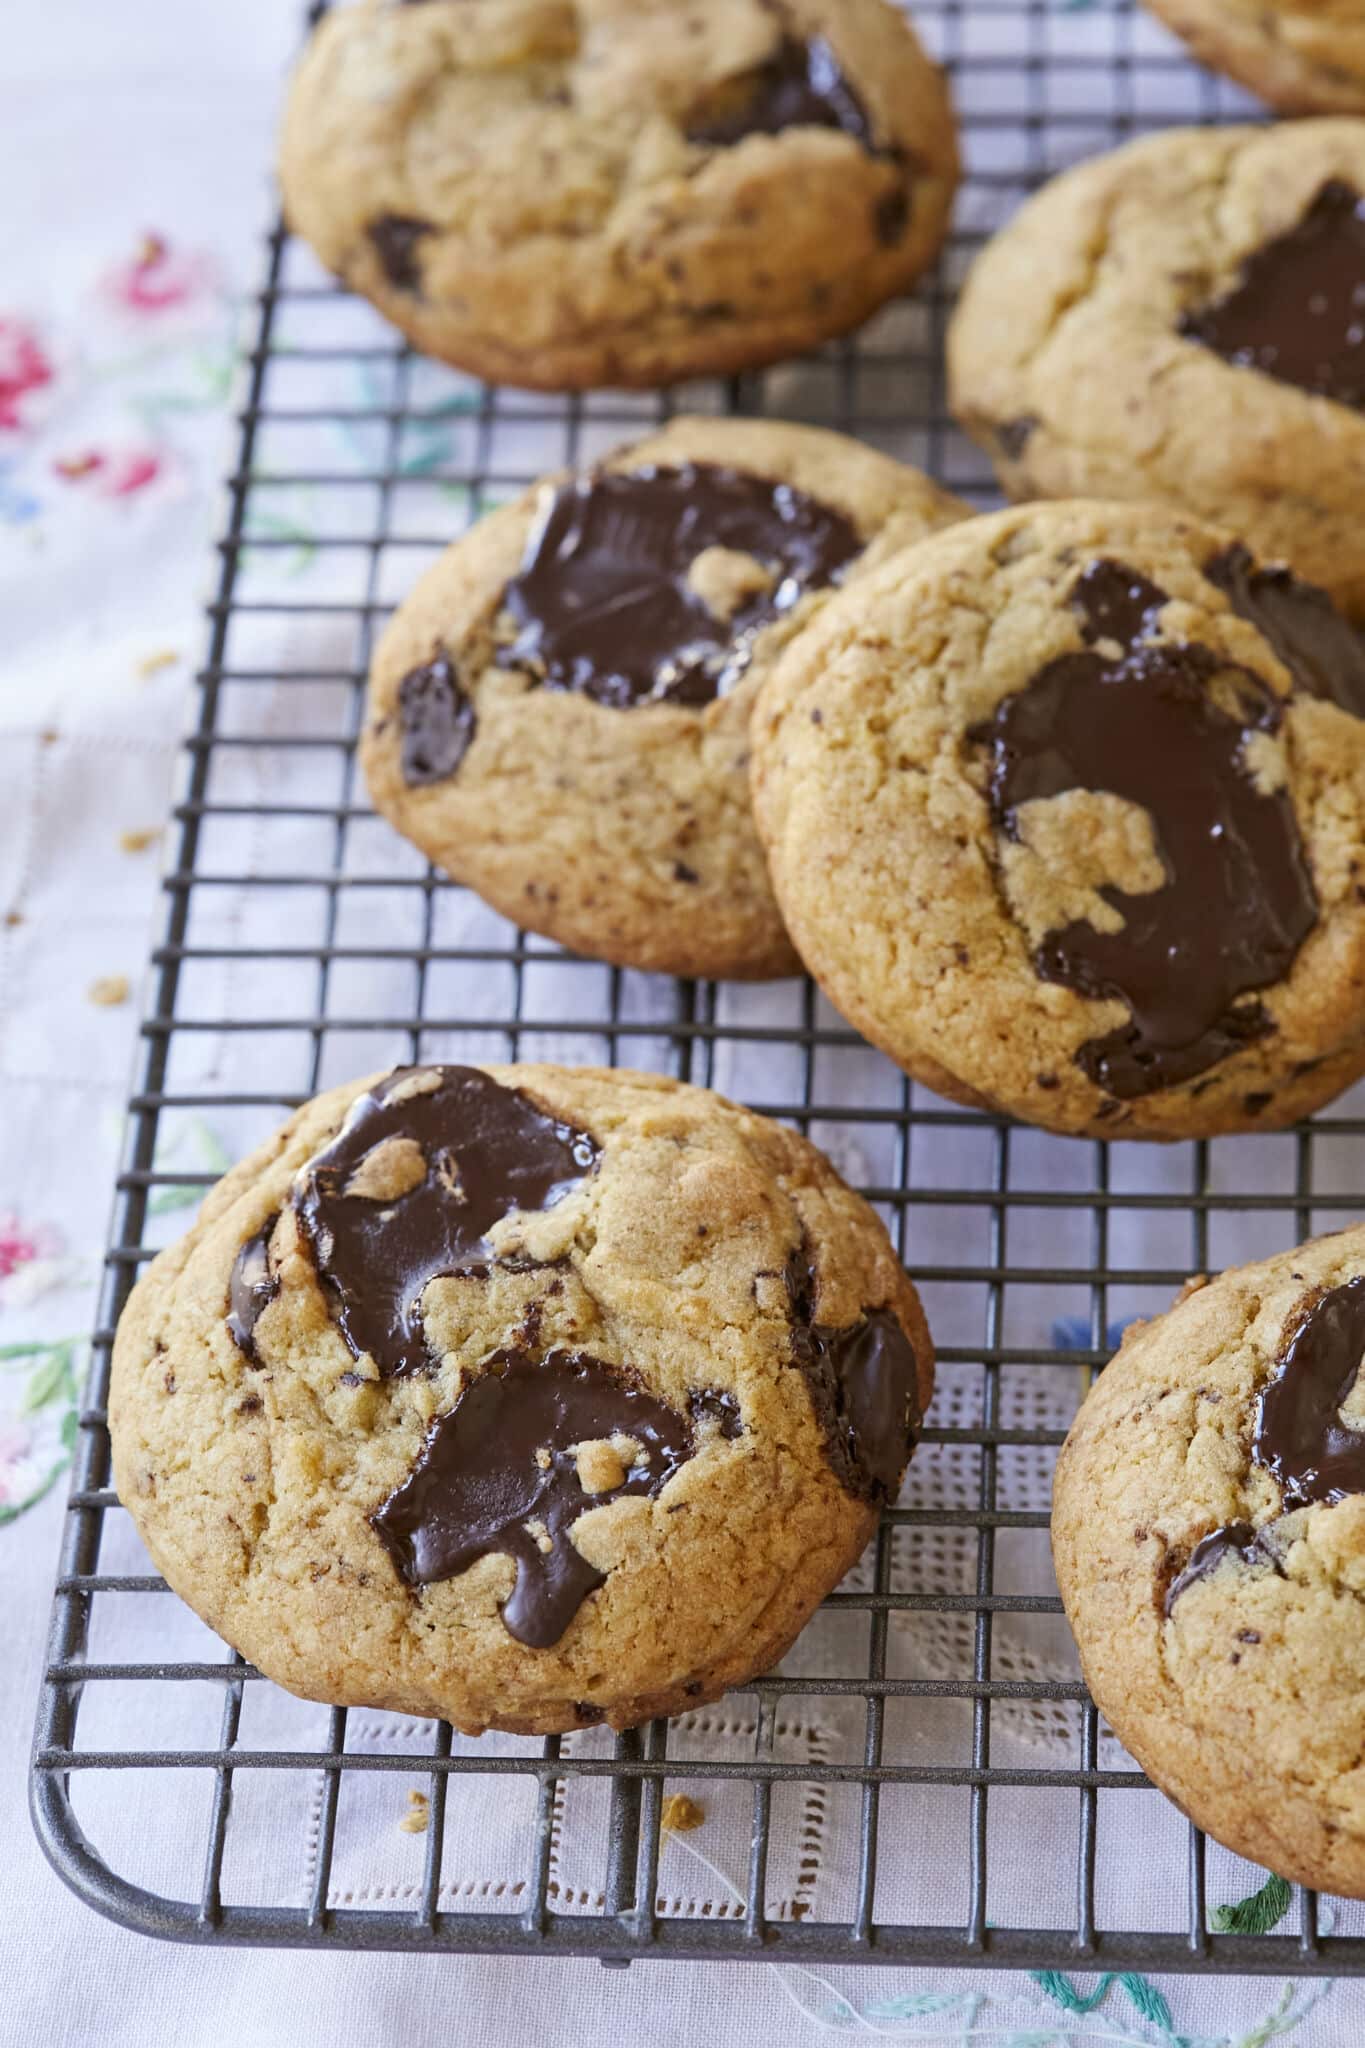 The close-up shows that Sourdough Chocolate Chip cookies are baked golden brown with pools of chocolate throughout are cooling on a wire rack.